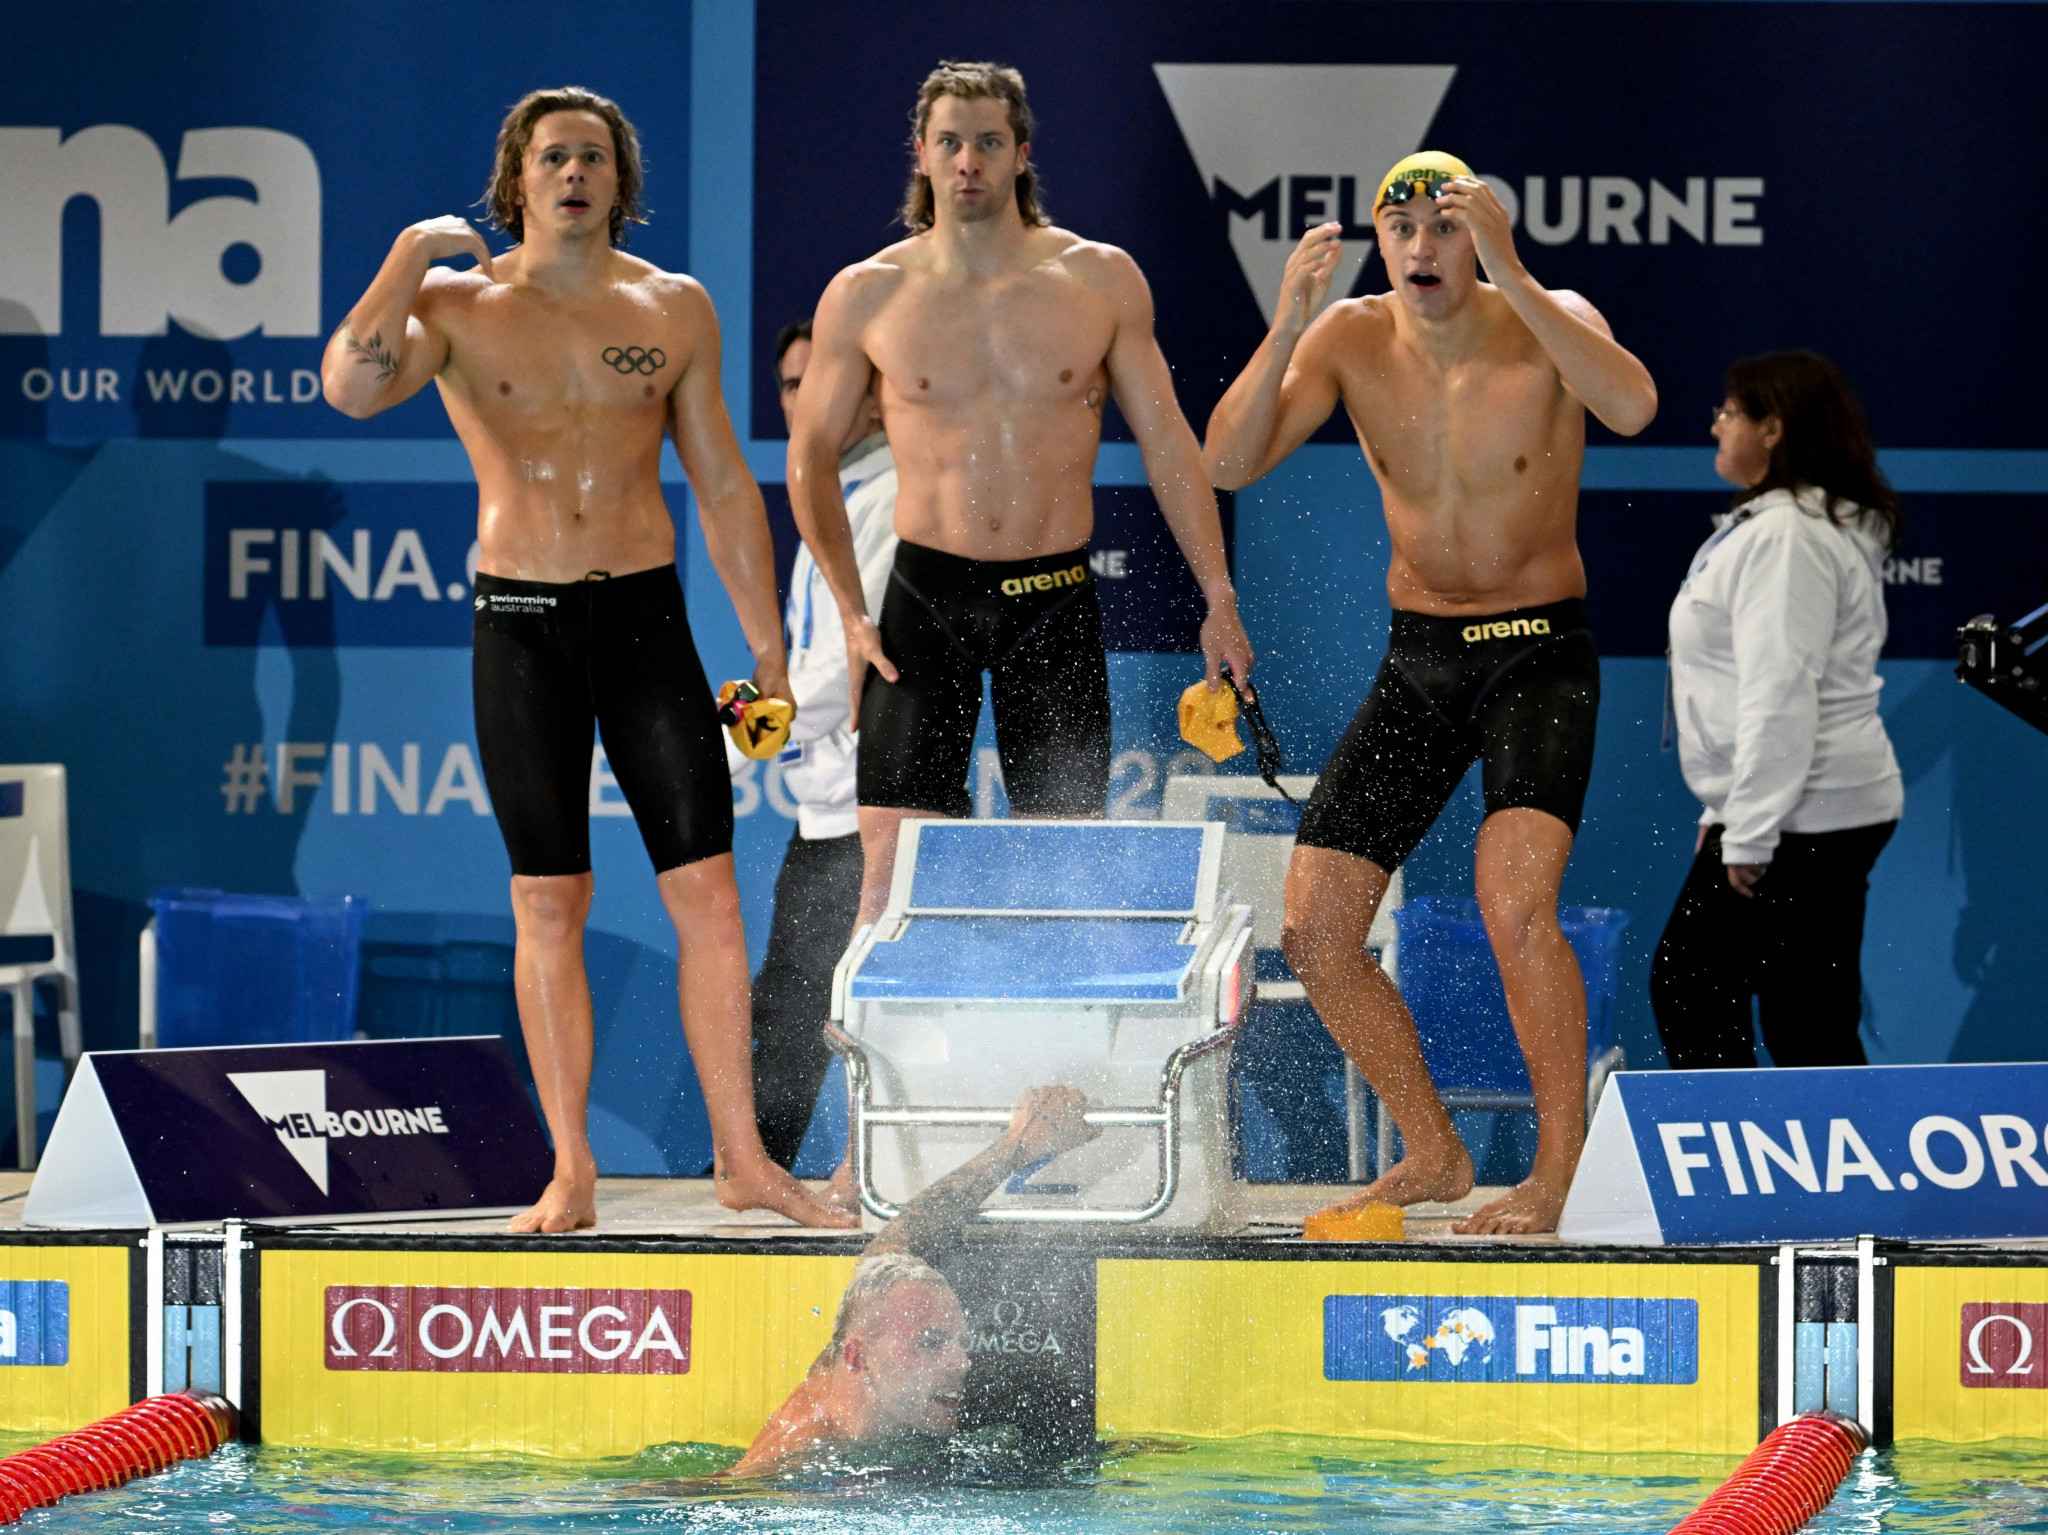 Kyle Chalmers produced a sensational final leg to help Australia win the men's 4x50m freestyle relay crown ©Getty Images